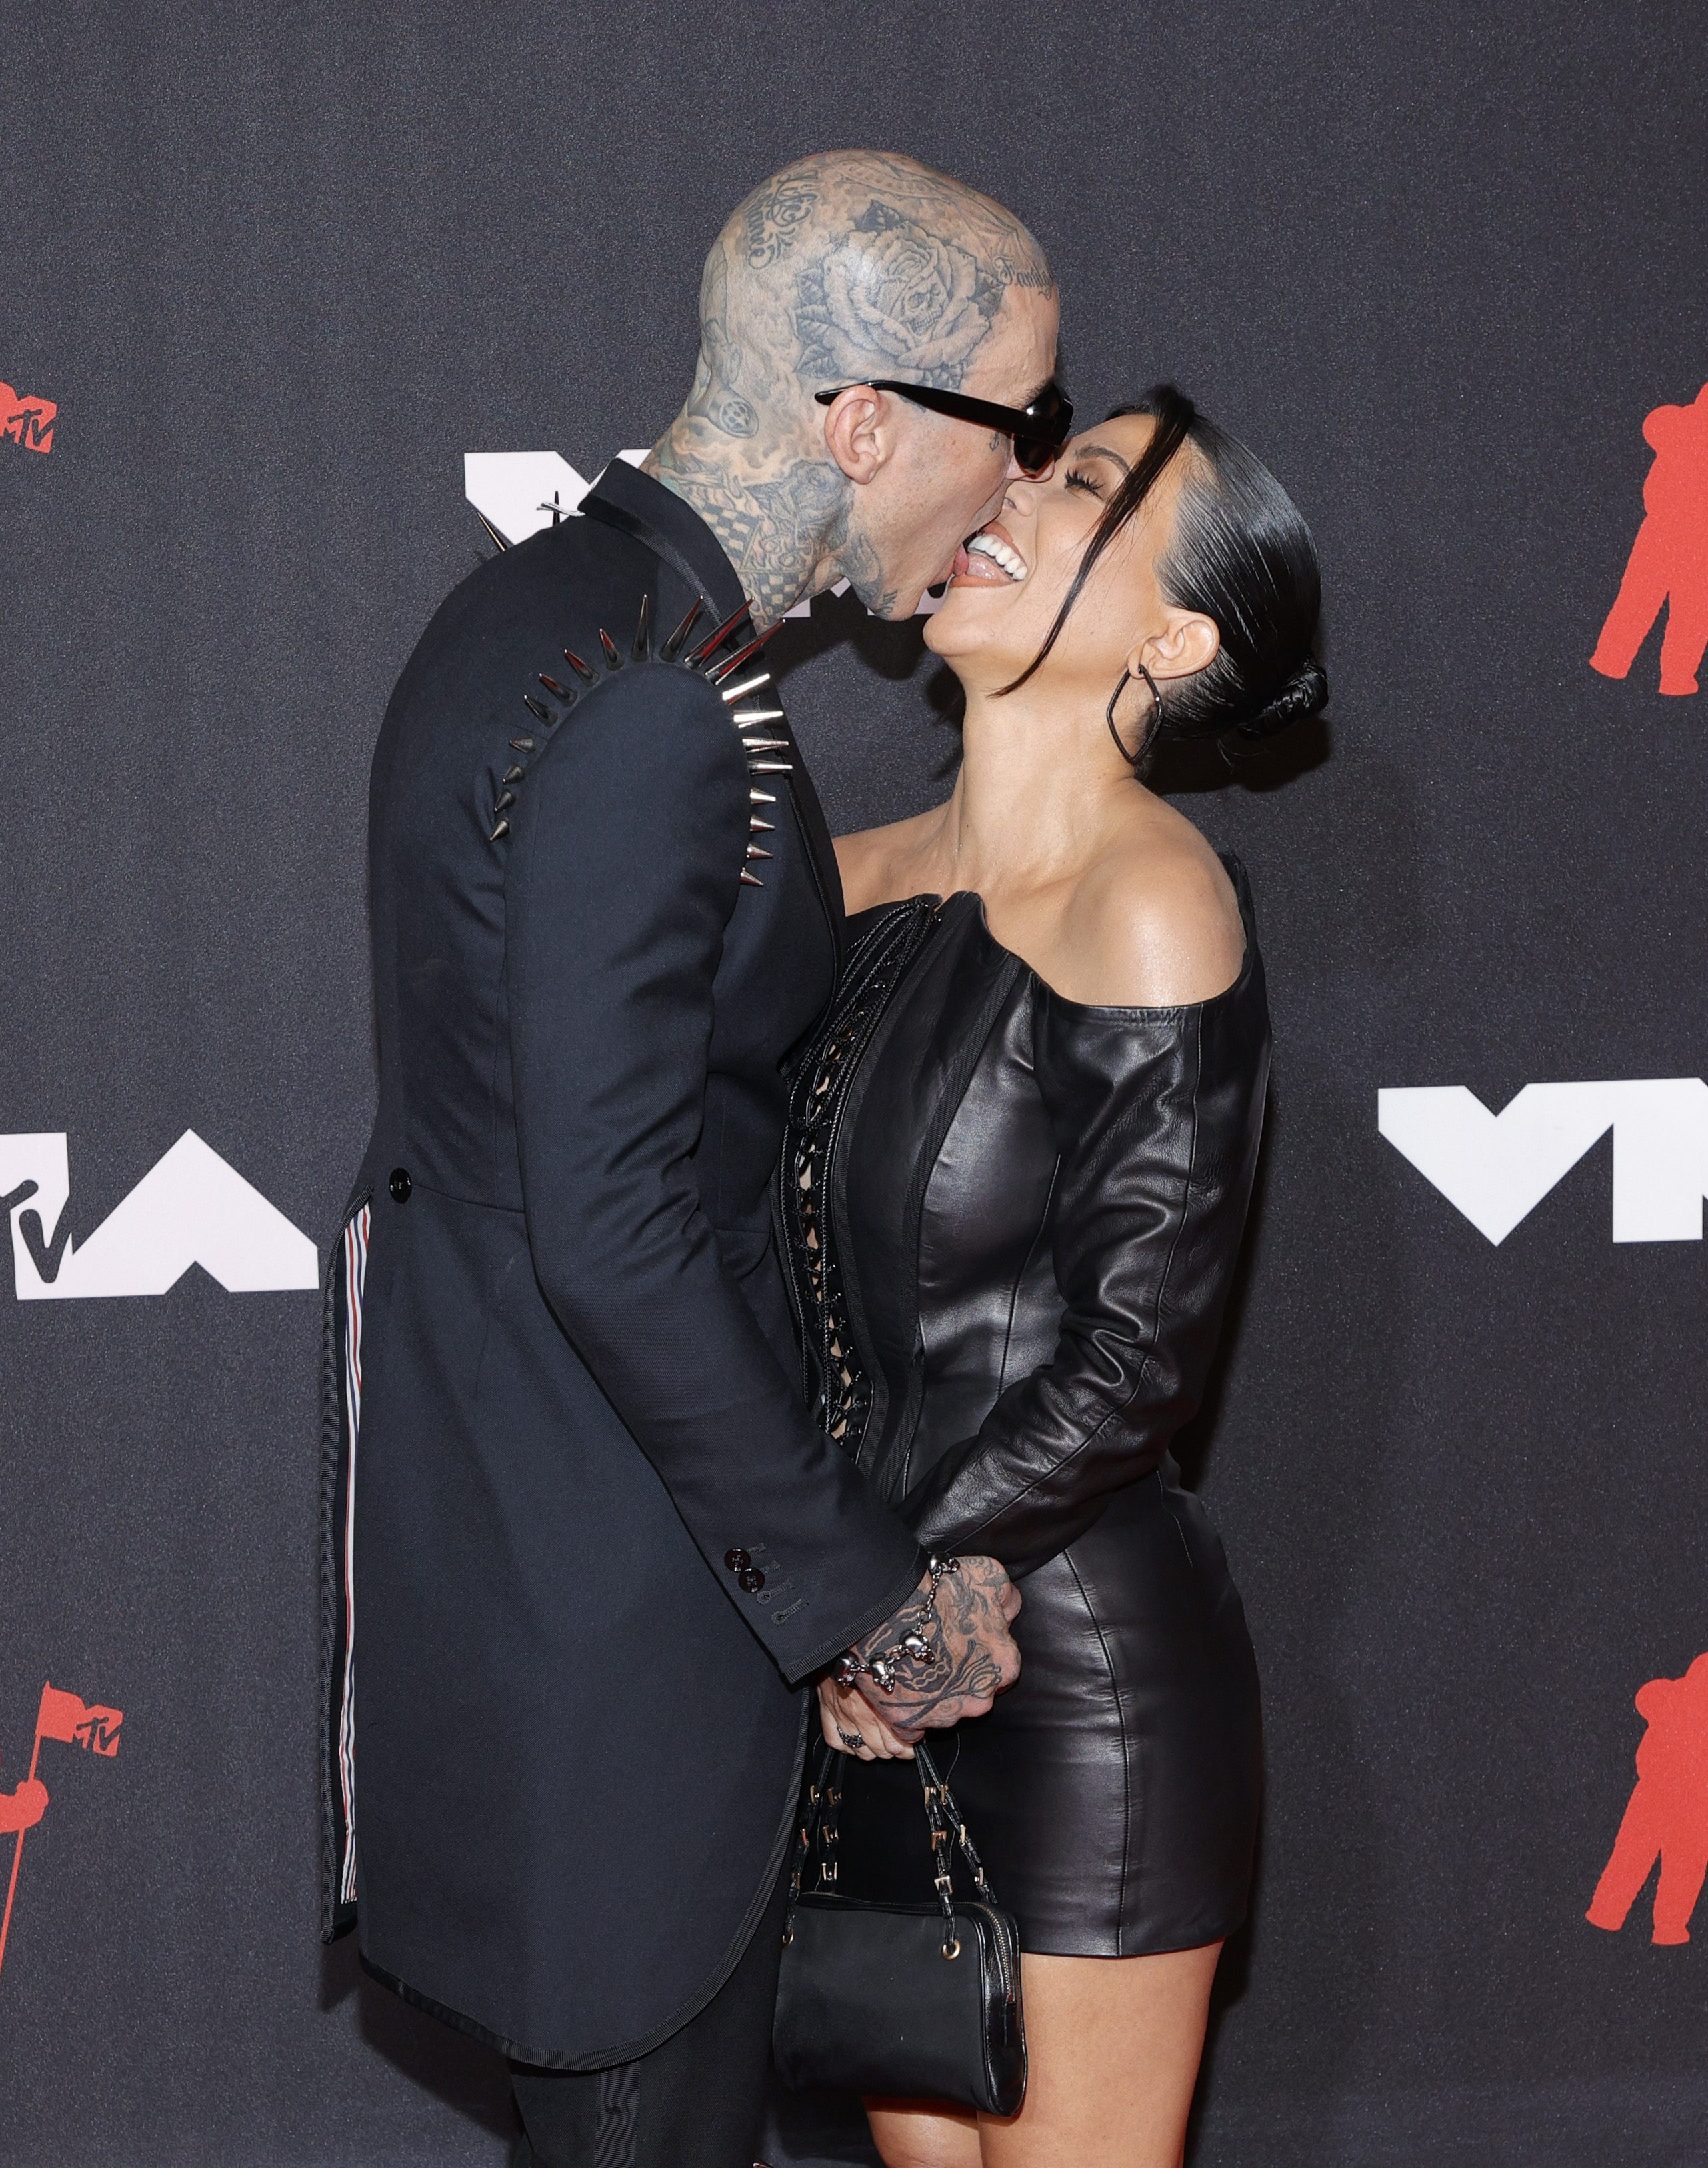 kourt and travis making out at an event